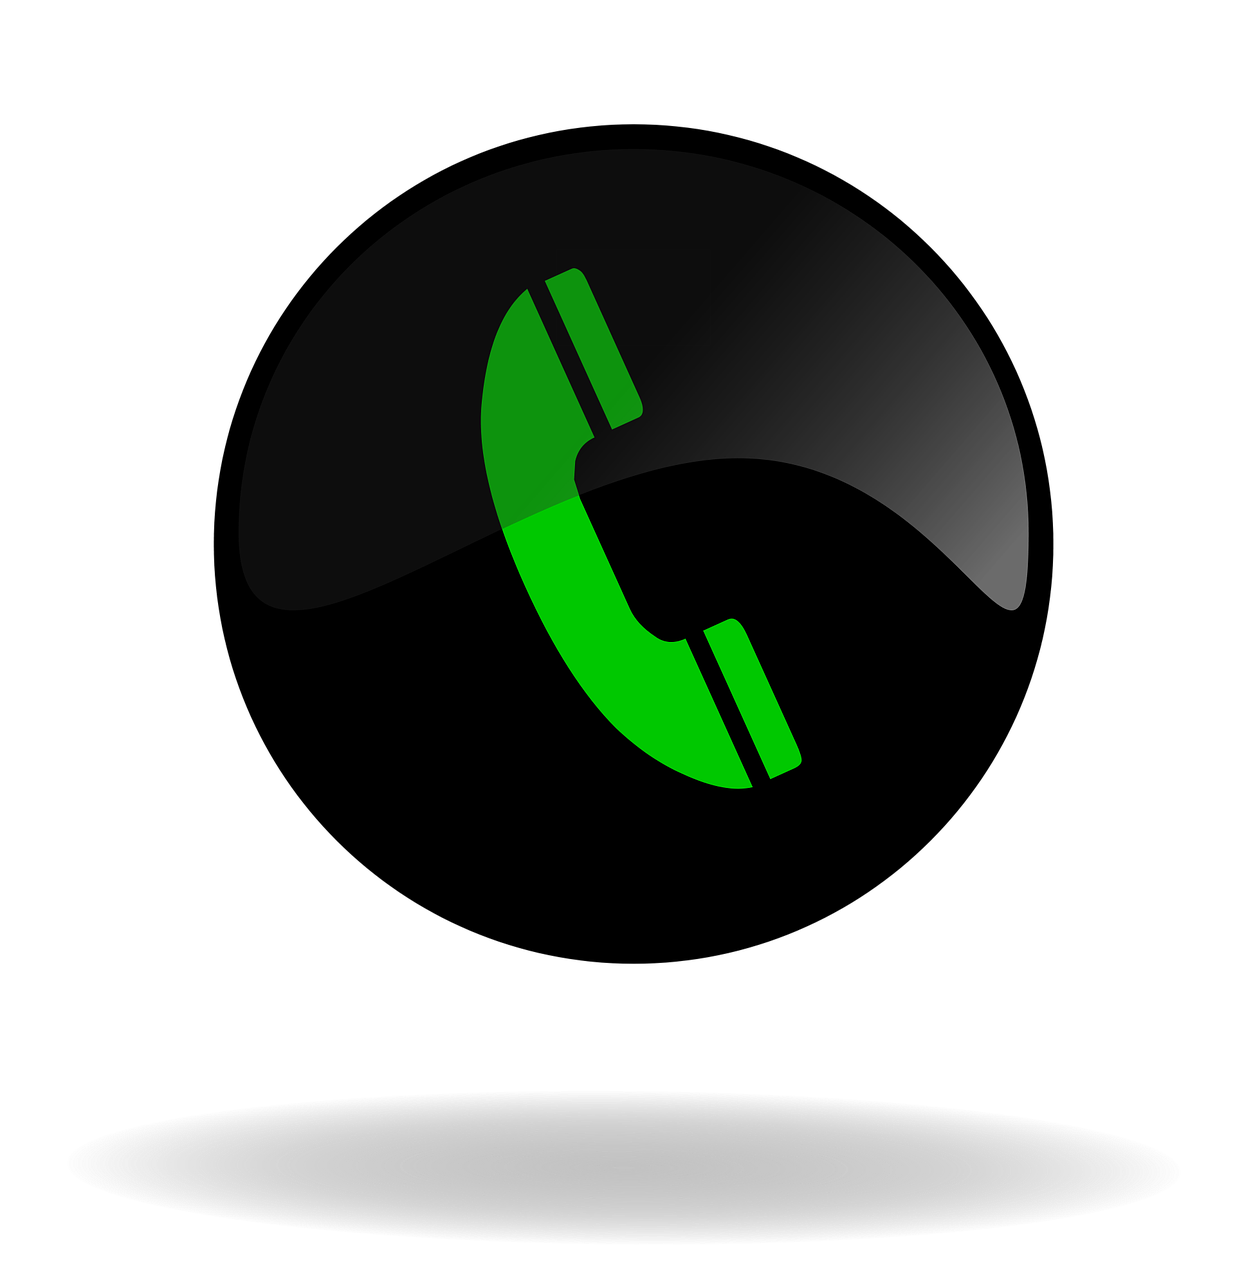 call call button black and green button free photo